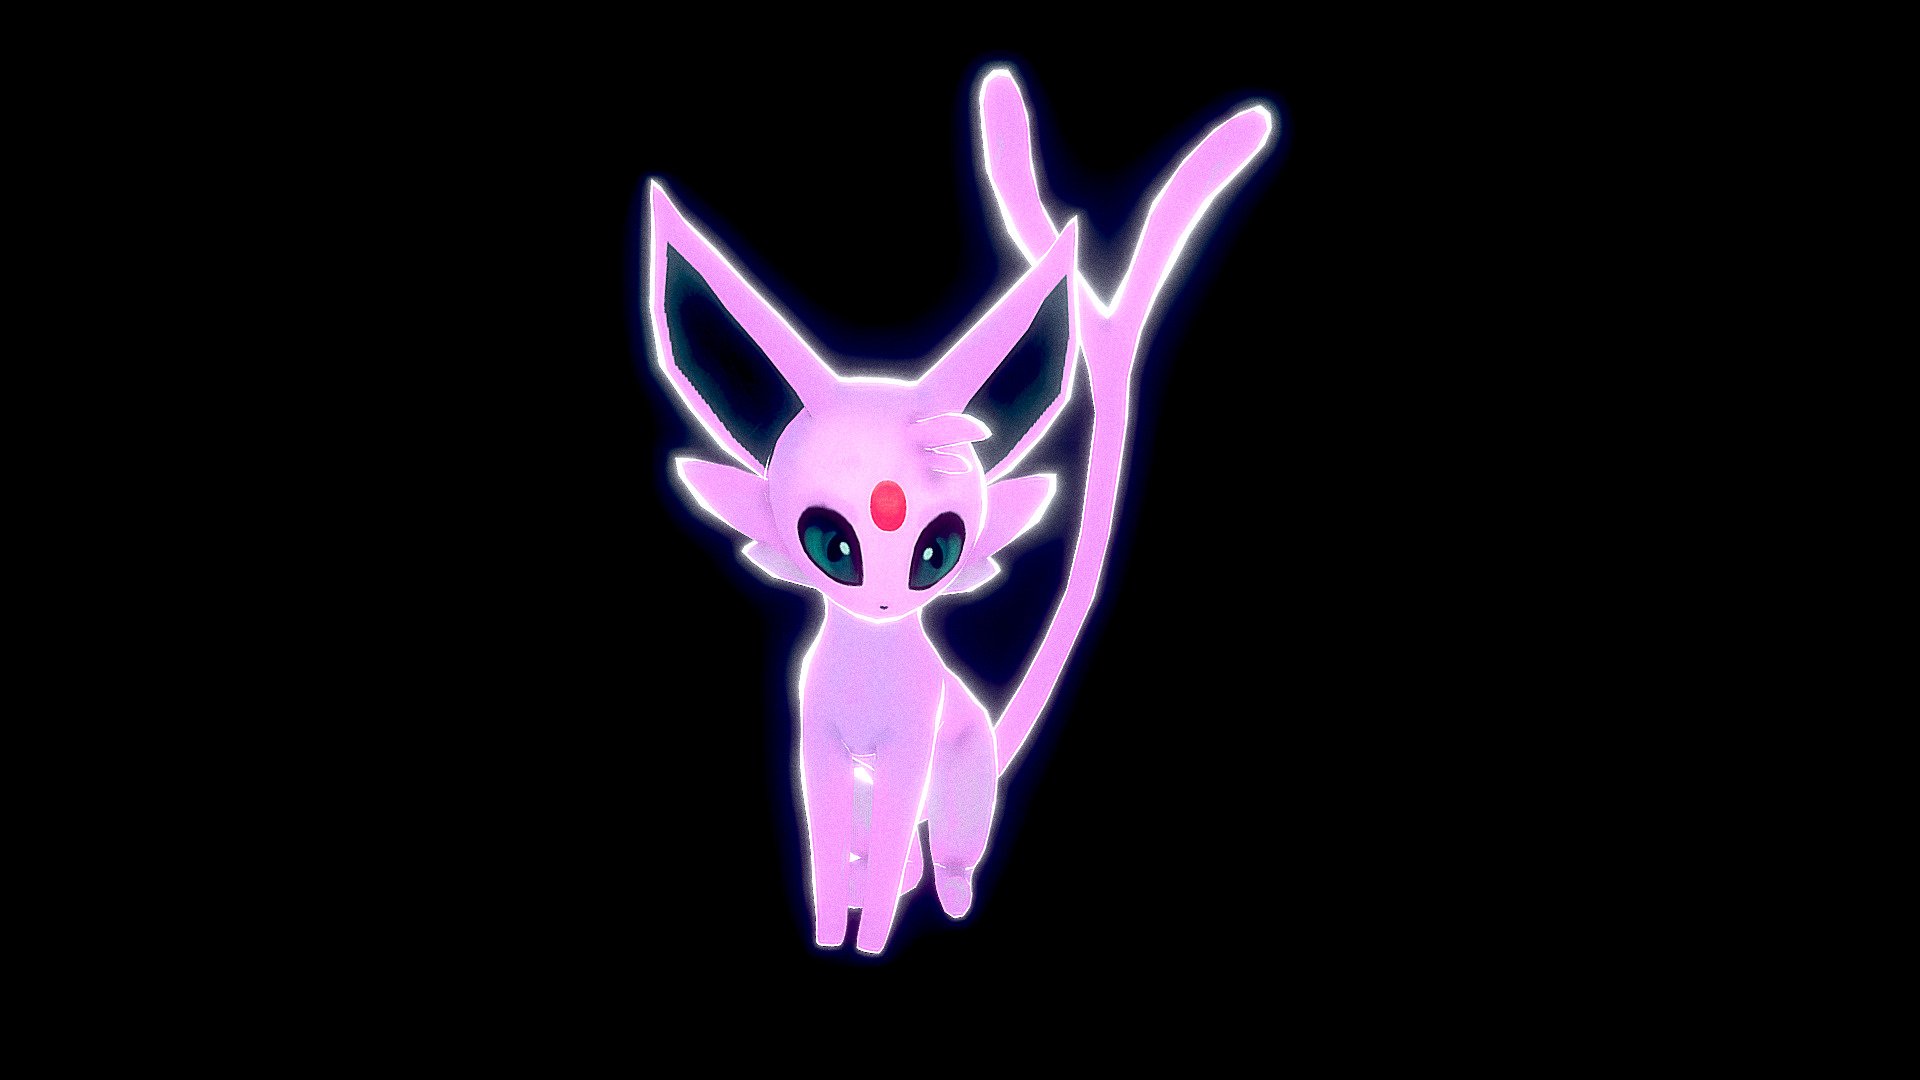 Little 3D model of a Pokemon named Espeon. Model has a rig and can be animated. Textures are handpainted and it has cellshading.

This is one of many Eevee evolutions in Pokemon 3d model